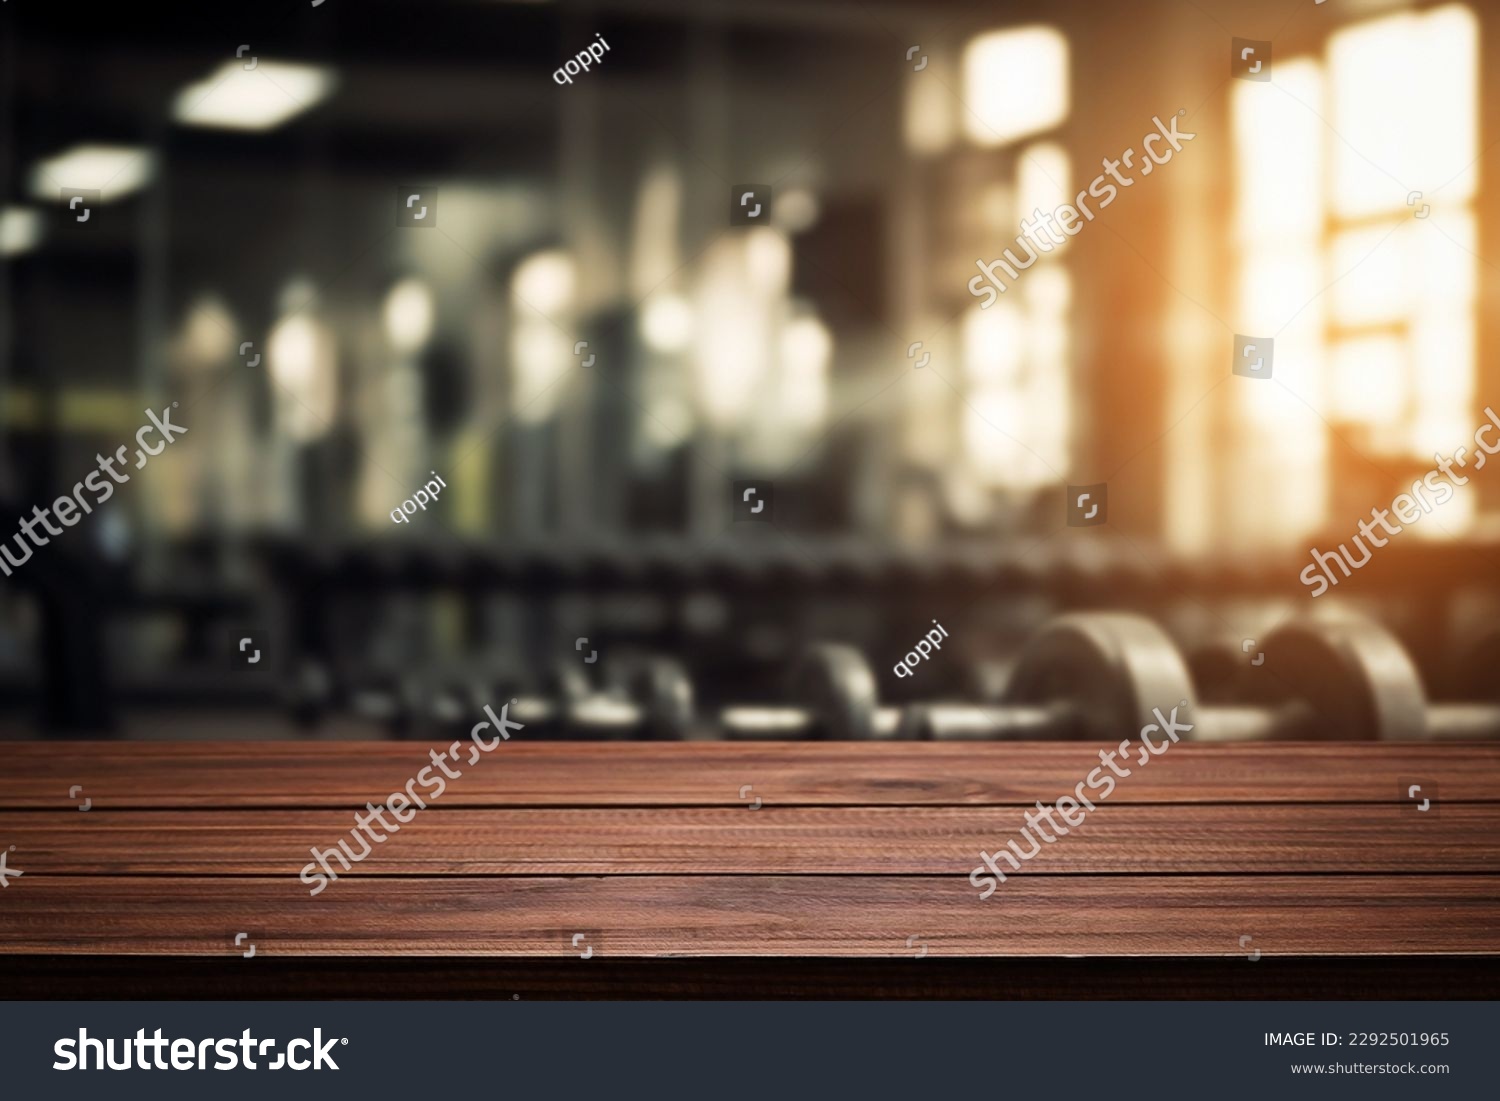 Blurred background of fitness gym and wooden table free space for product display. #2292501965